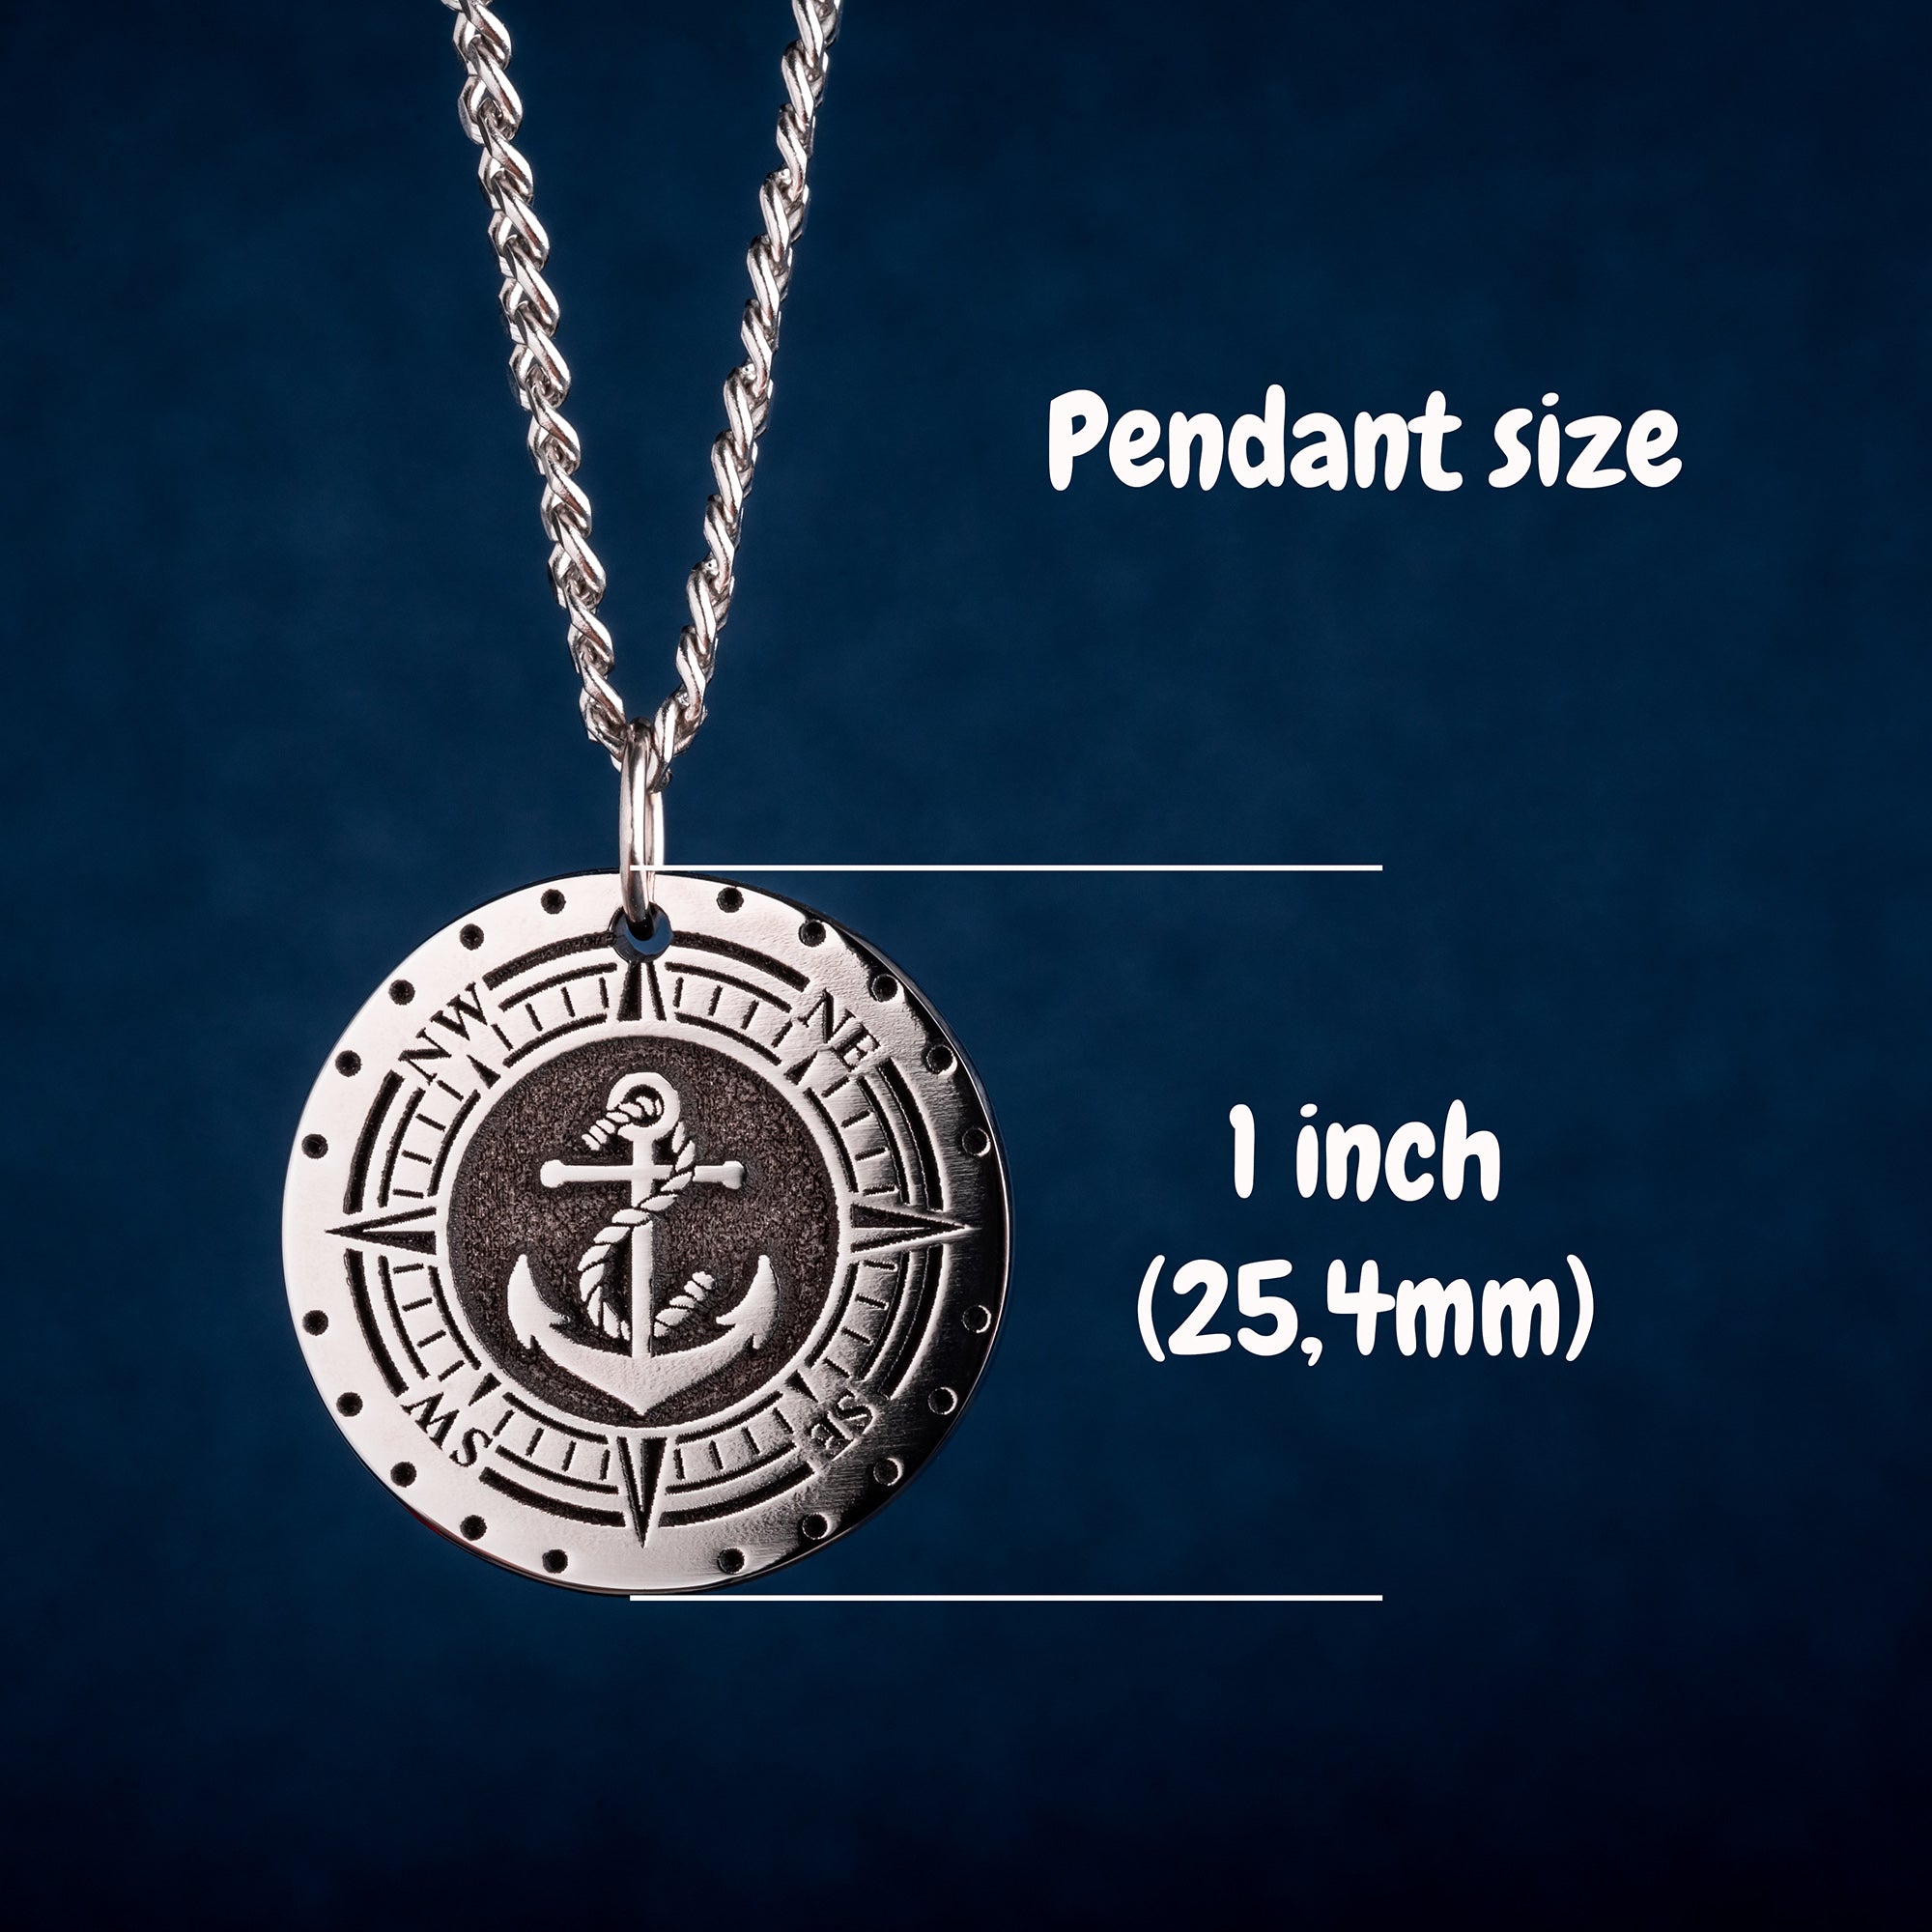 Gold Anchor Chain Necklace Nautical - Large and Heavy -